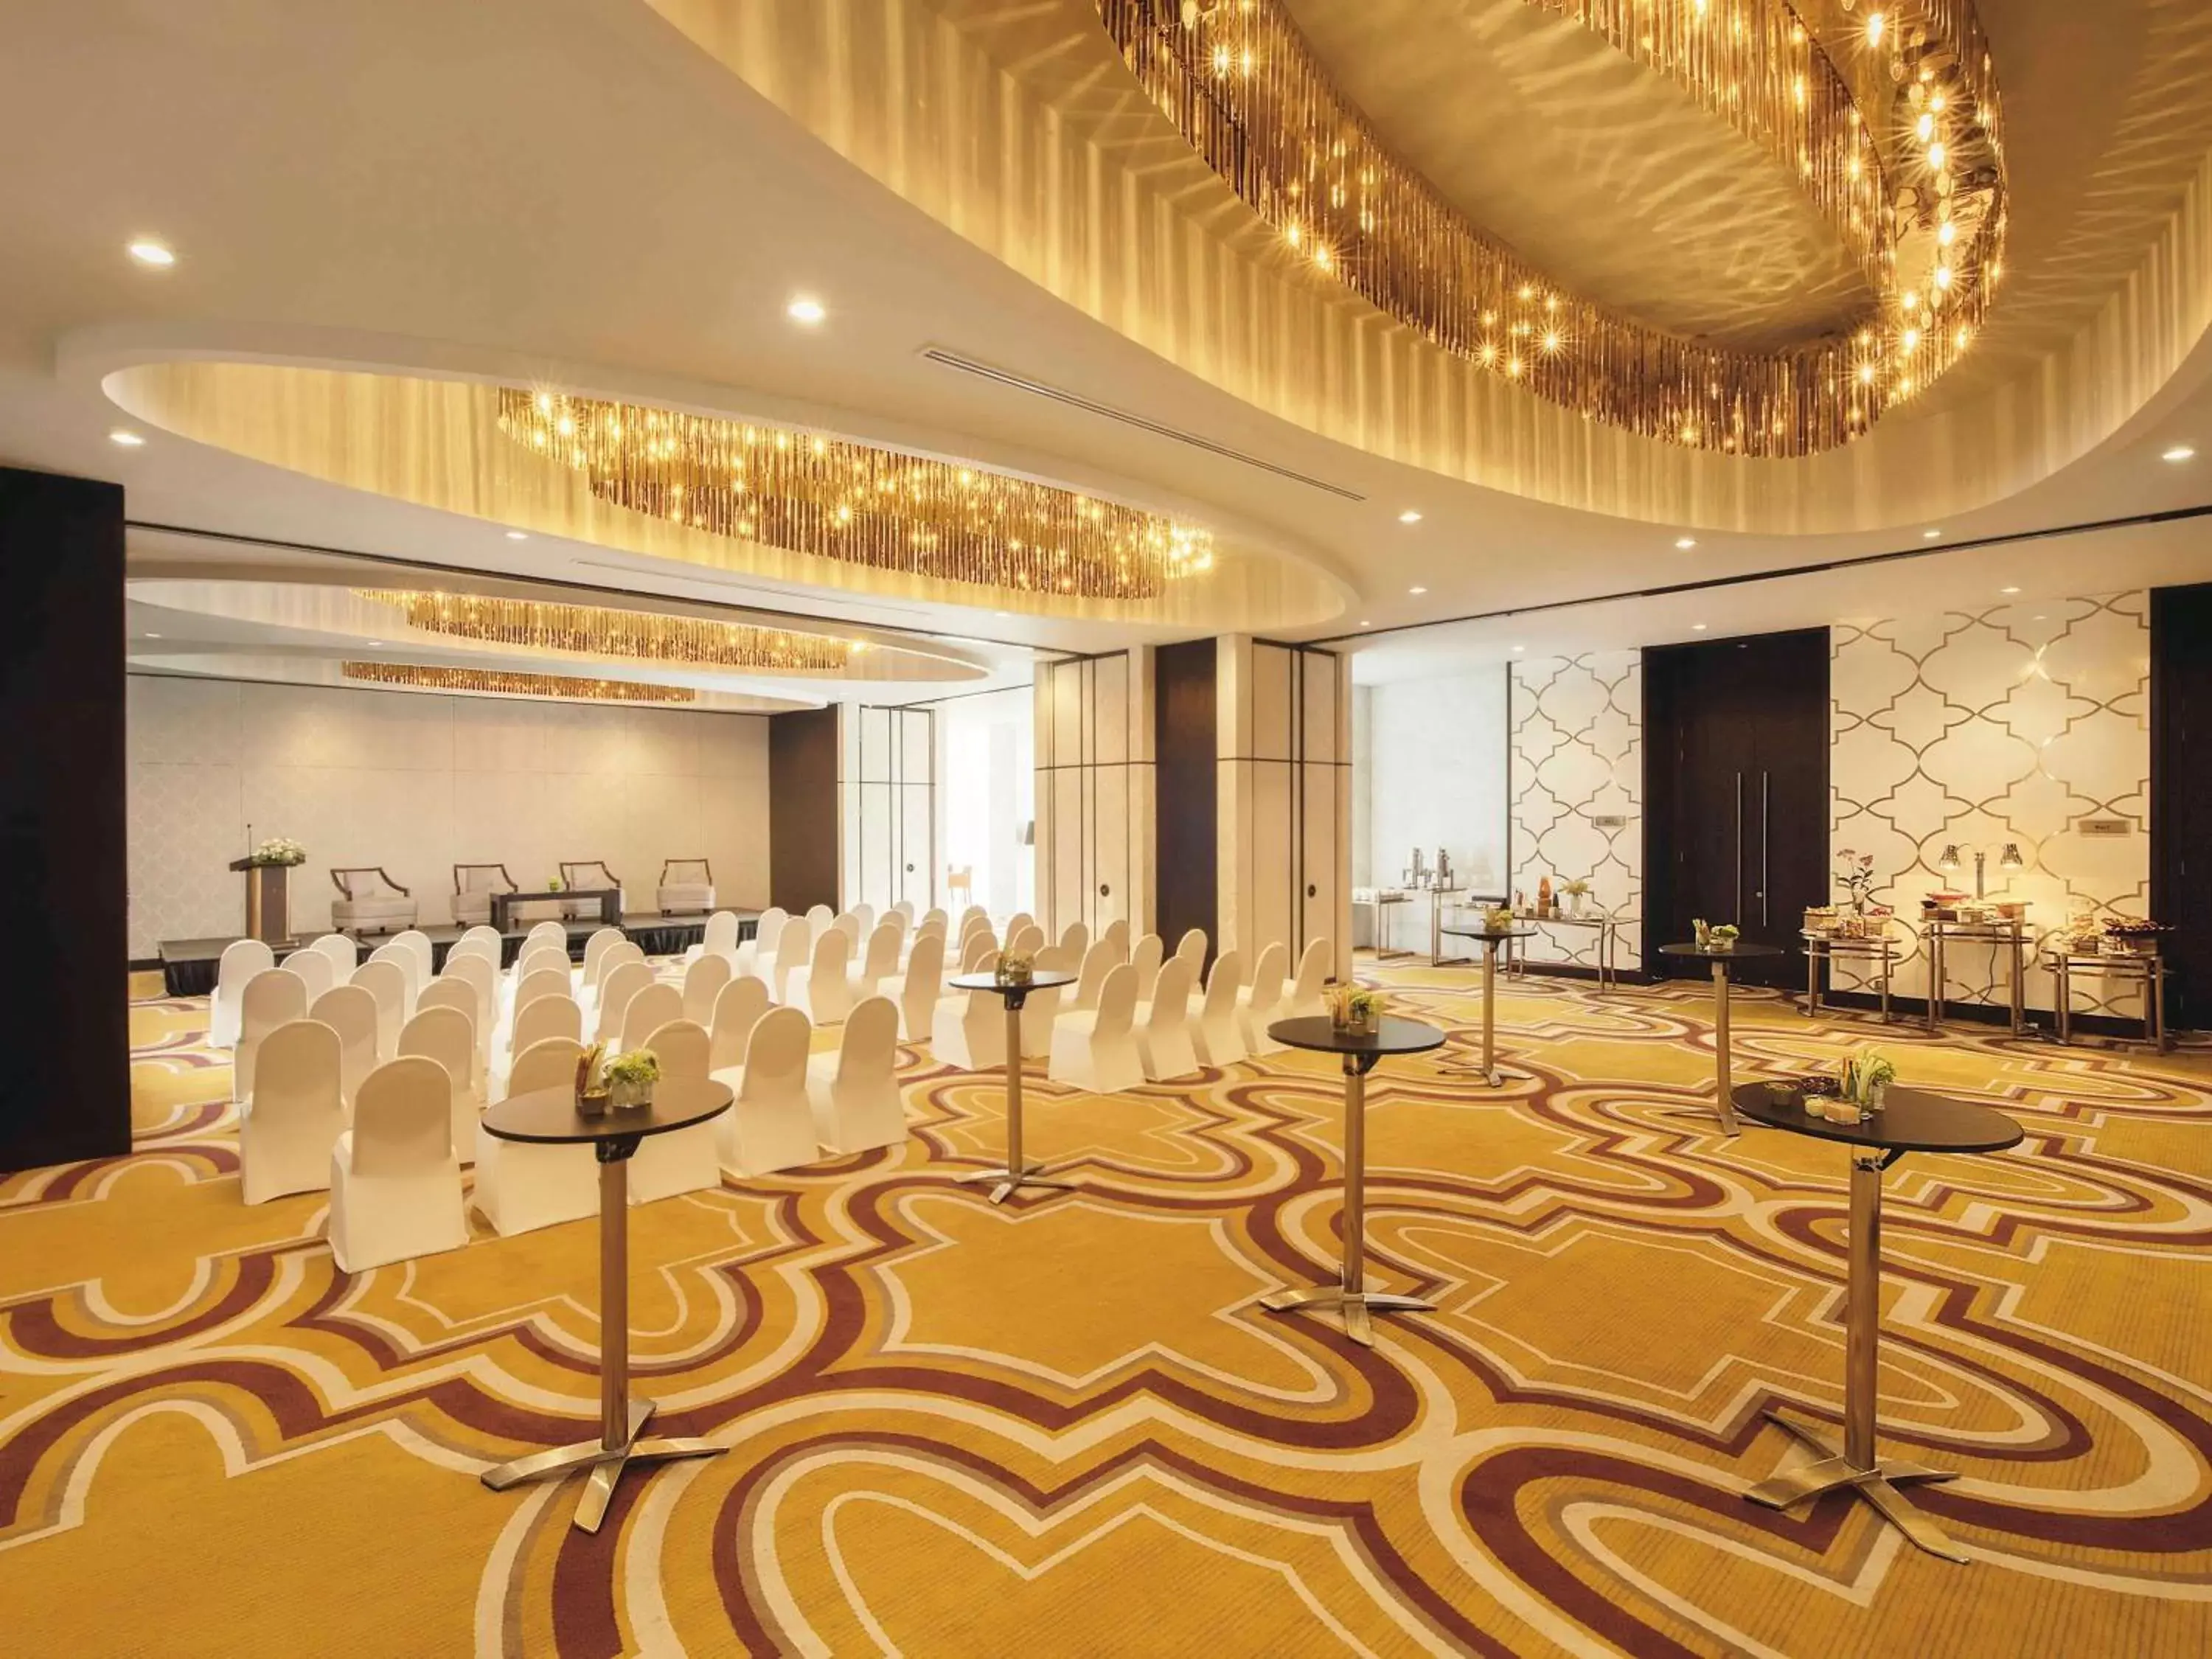 On site, Banquet Facilities in Movenpick Hotel Colombo